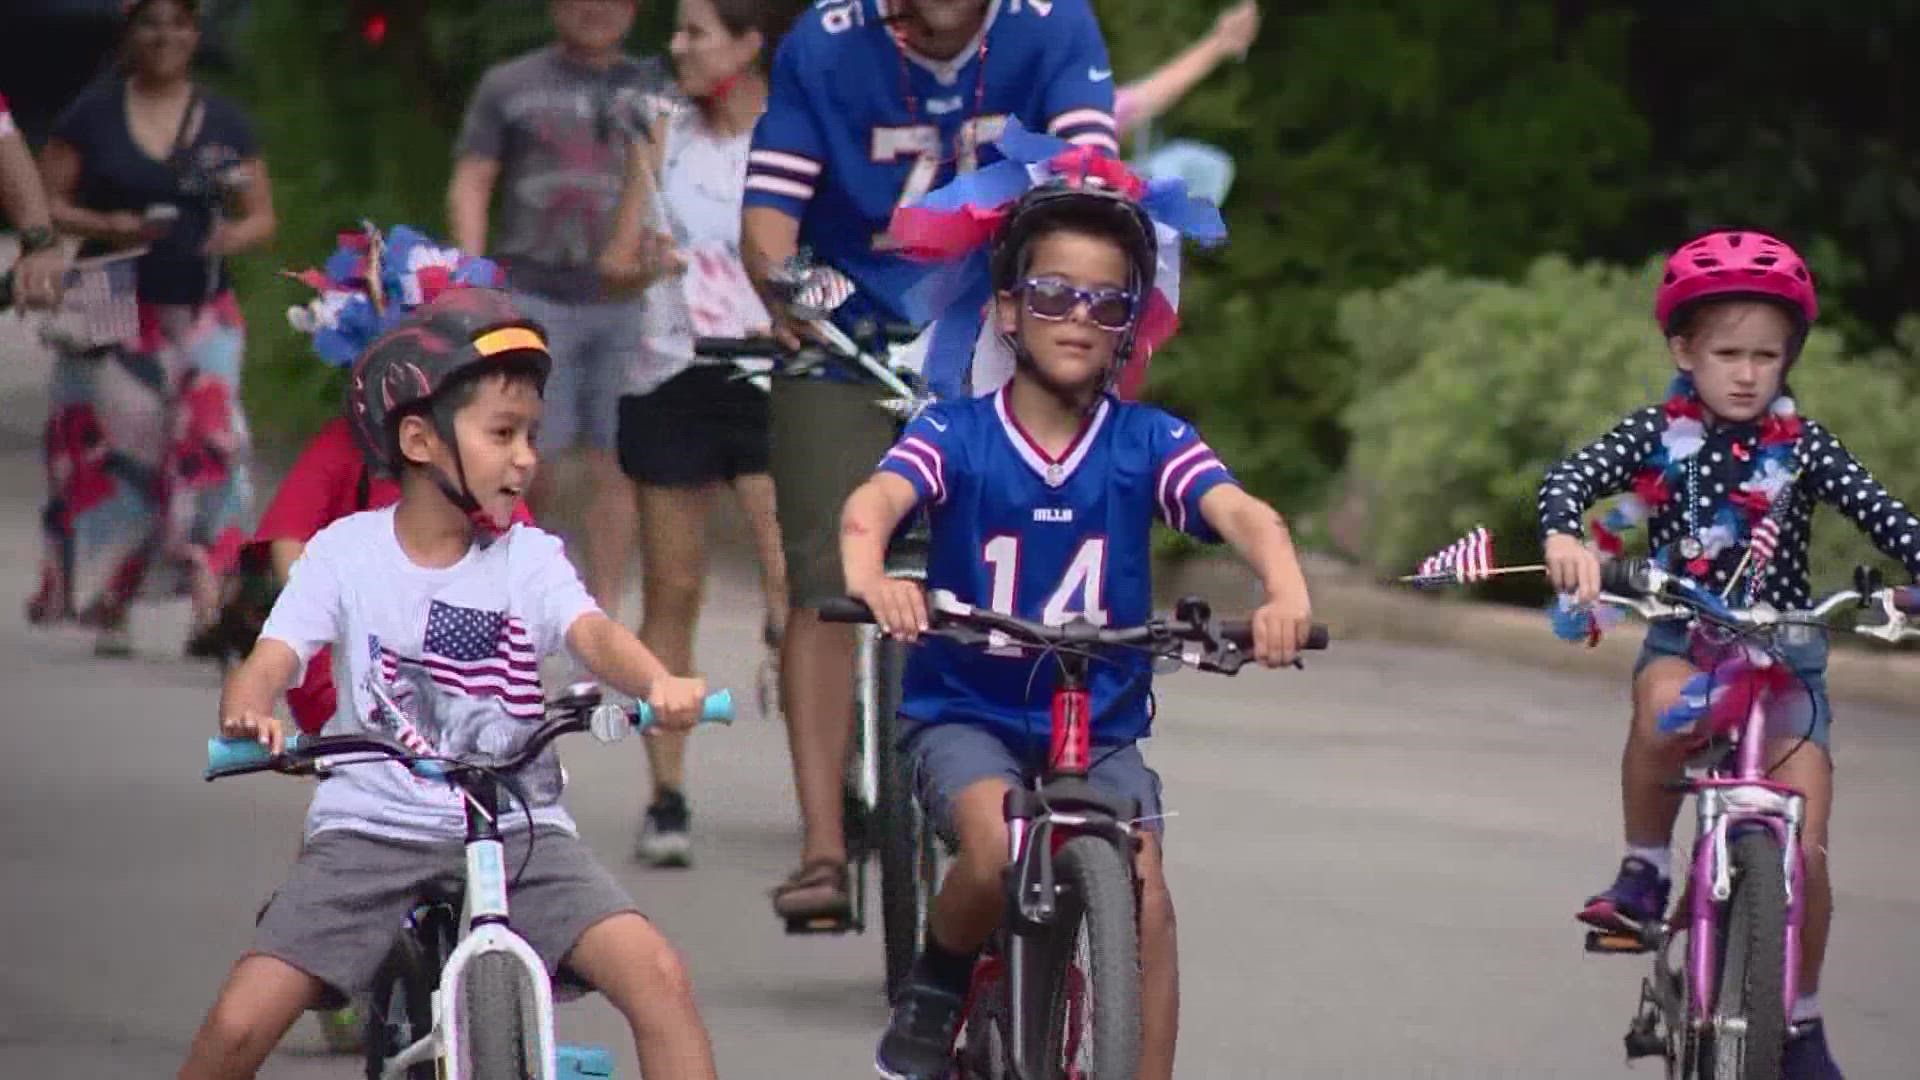 From Woodlawn Lake Park to Alamo Heights, people are celebrating Independence Day across the Alamo City.